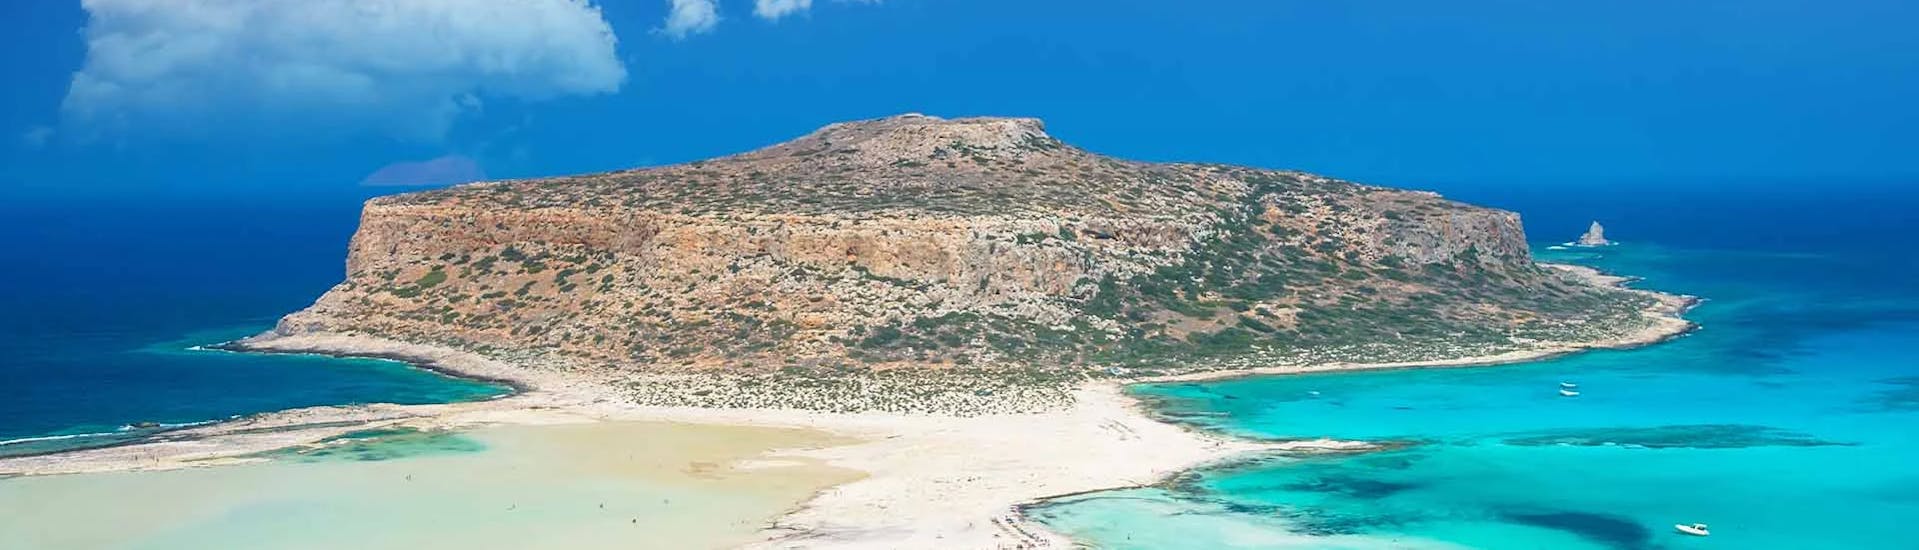 Gramvousa Island you can admire during the Private RIB Boat Trip from Falasarna to the Balos Lagoon & Gramvousa.